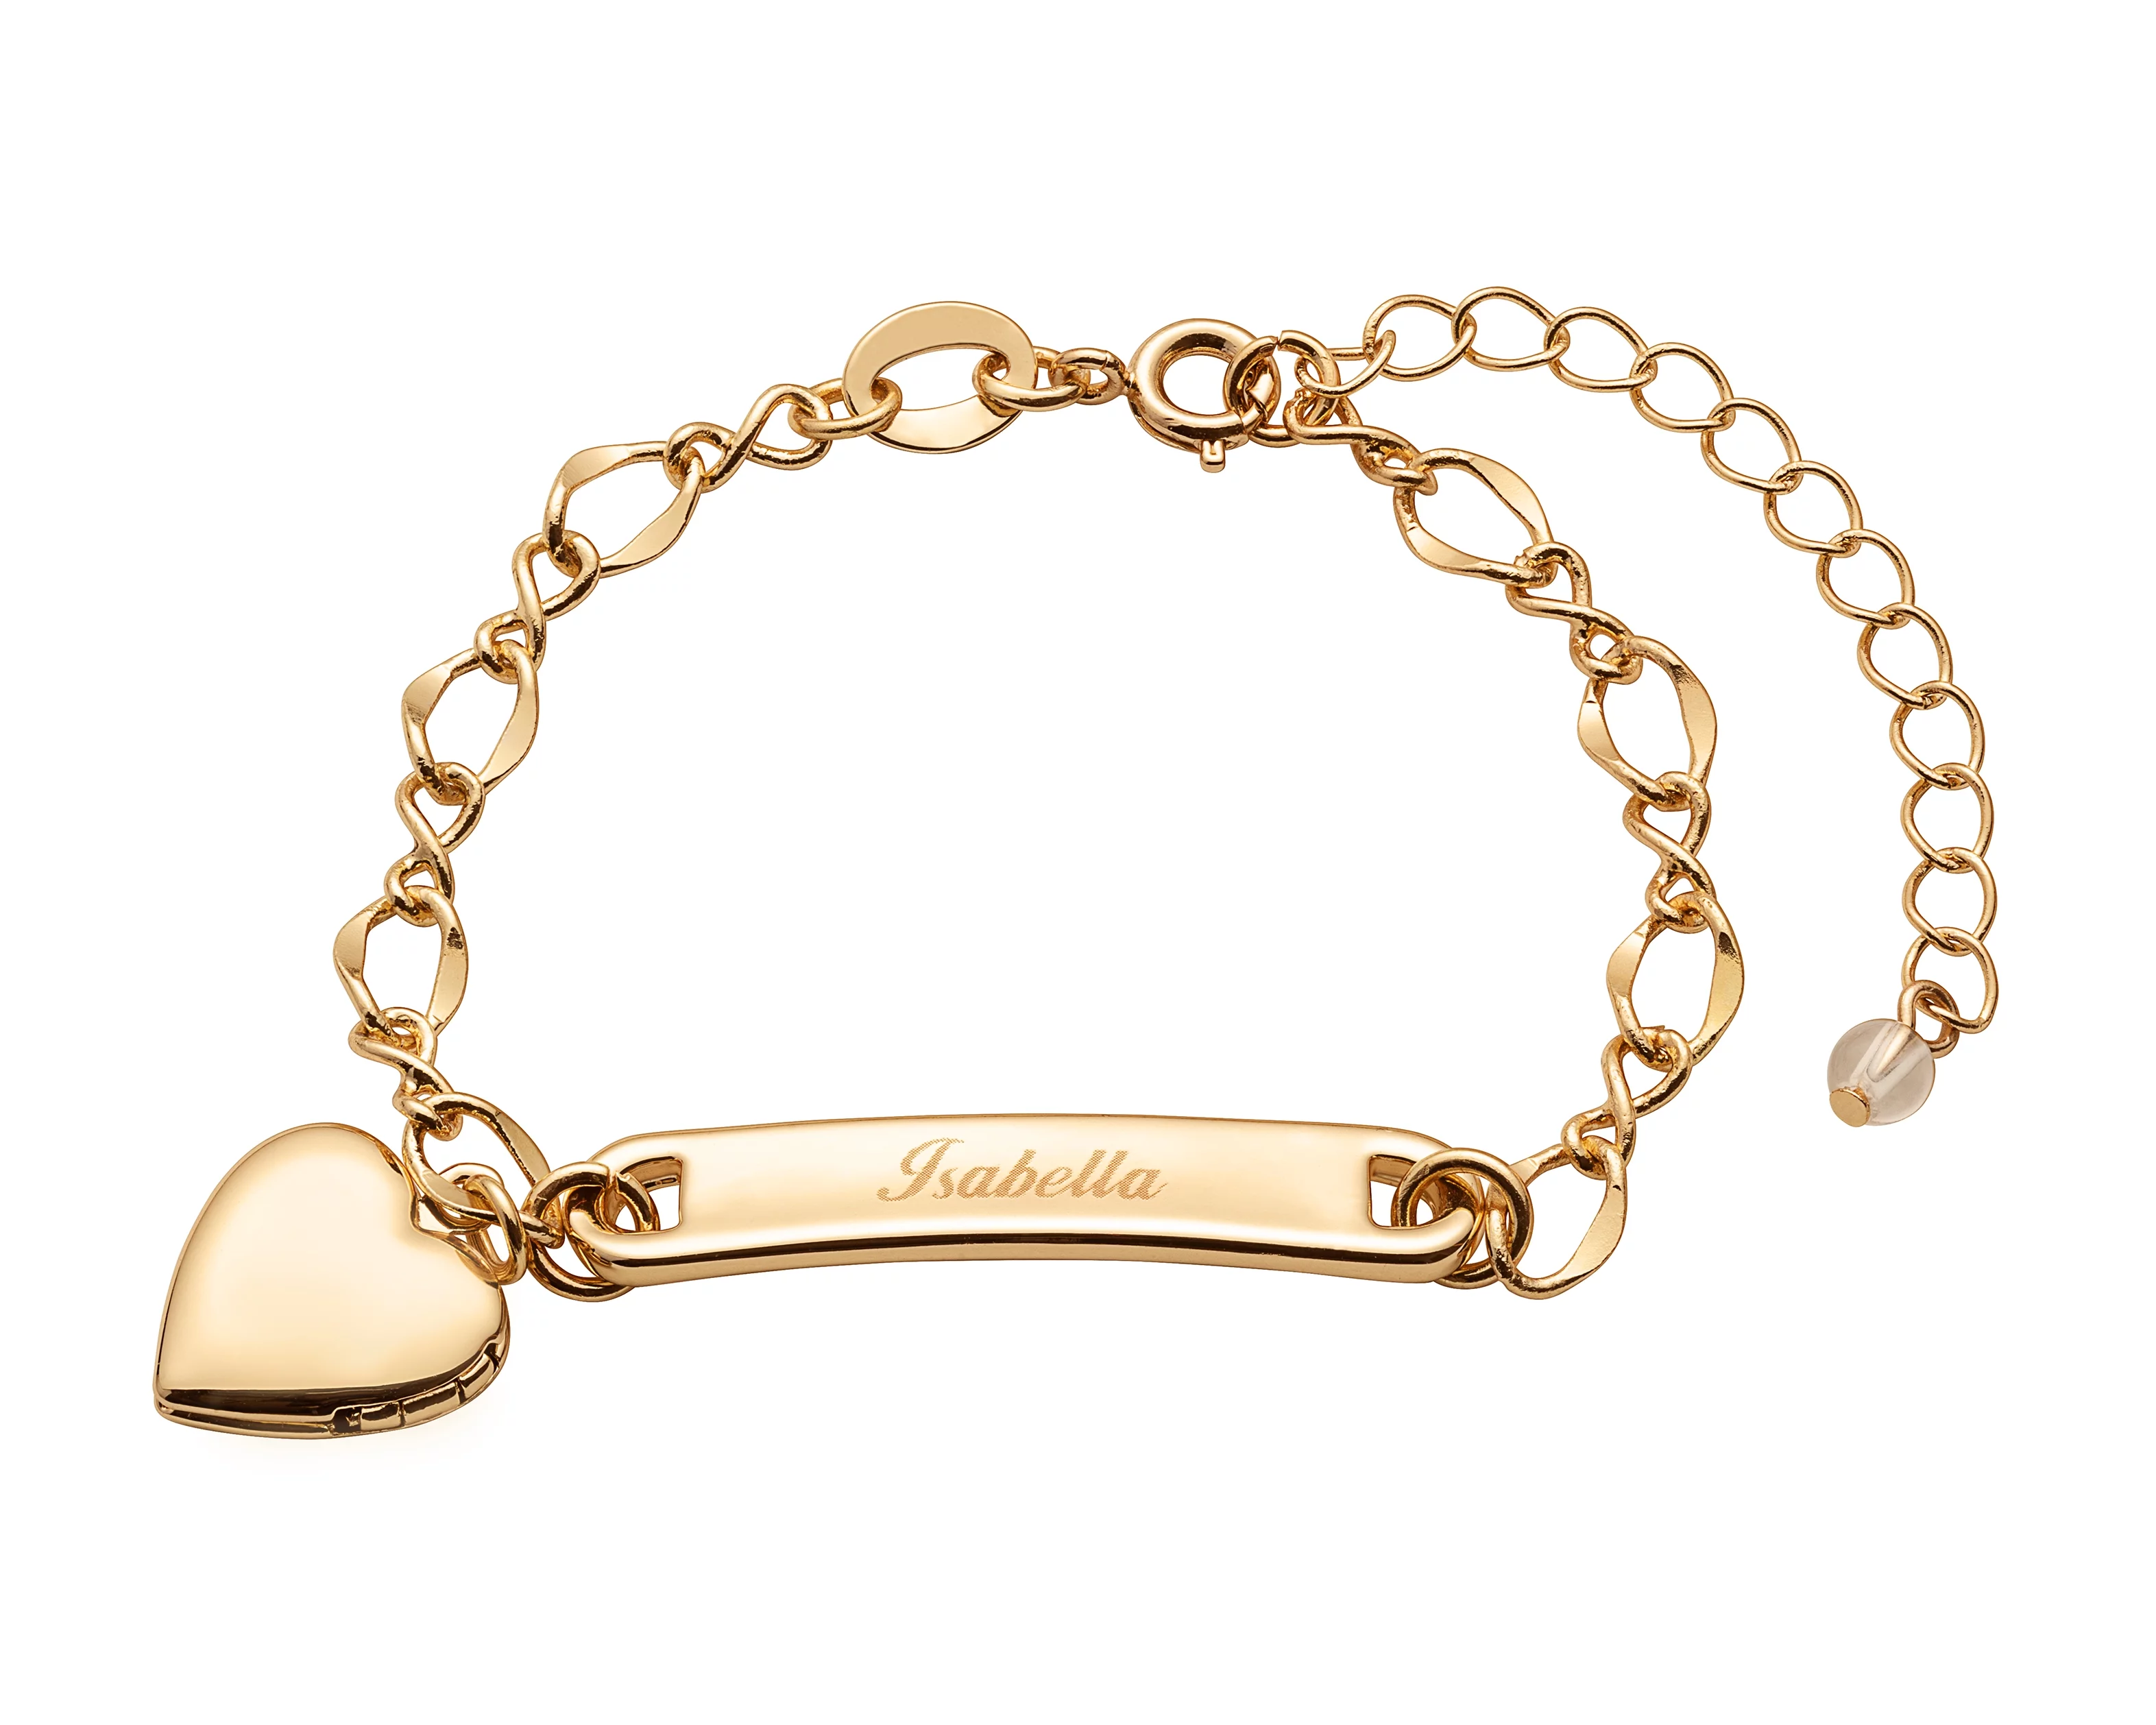 Personalized Gold-Tone Girls' Heart Charm Name Bracelet, 6"+2" Ext